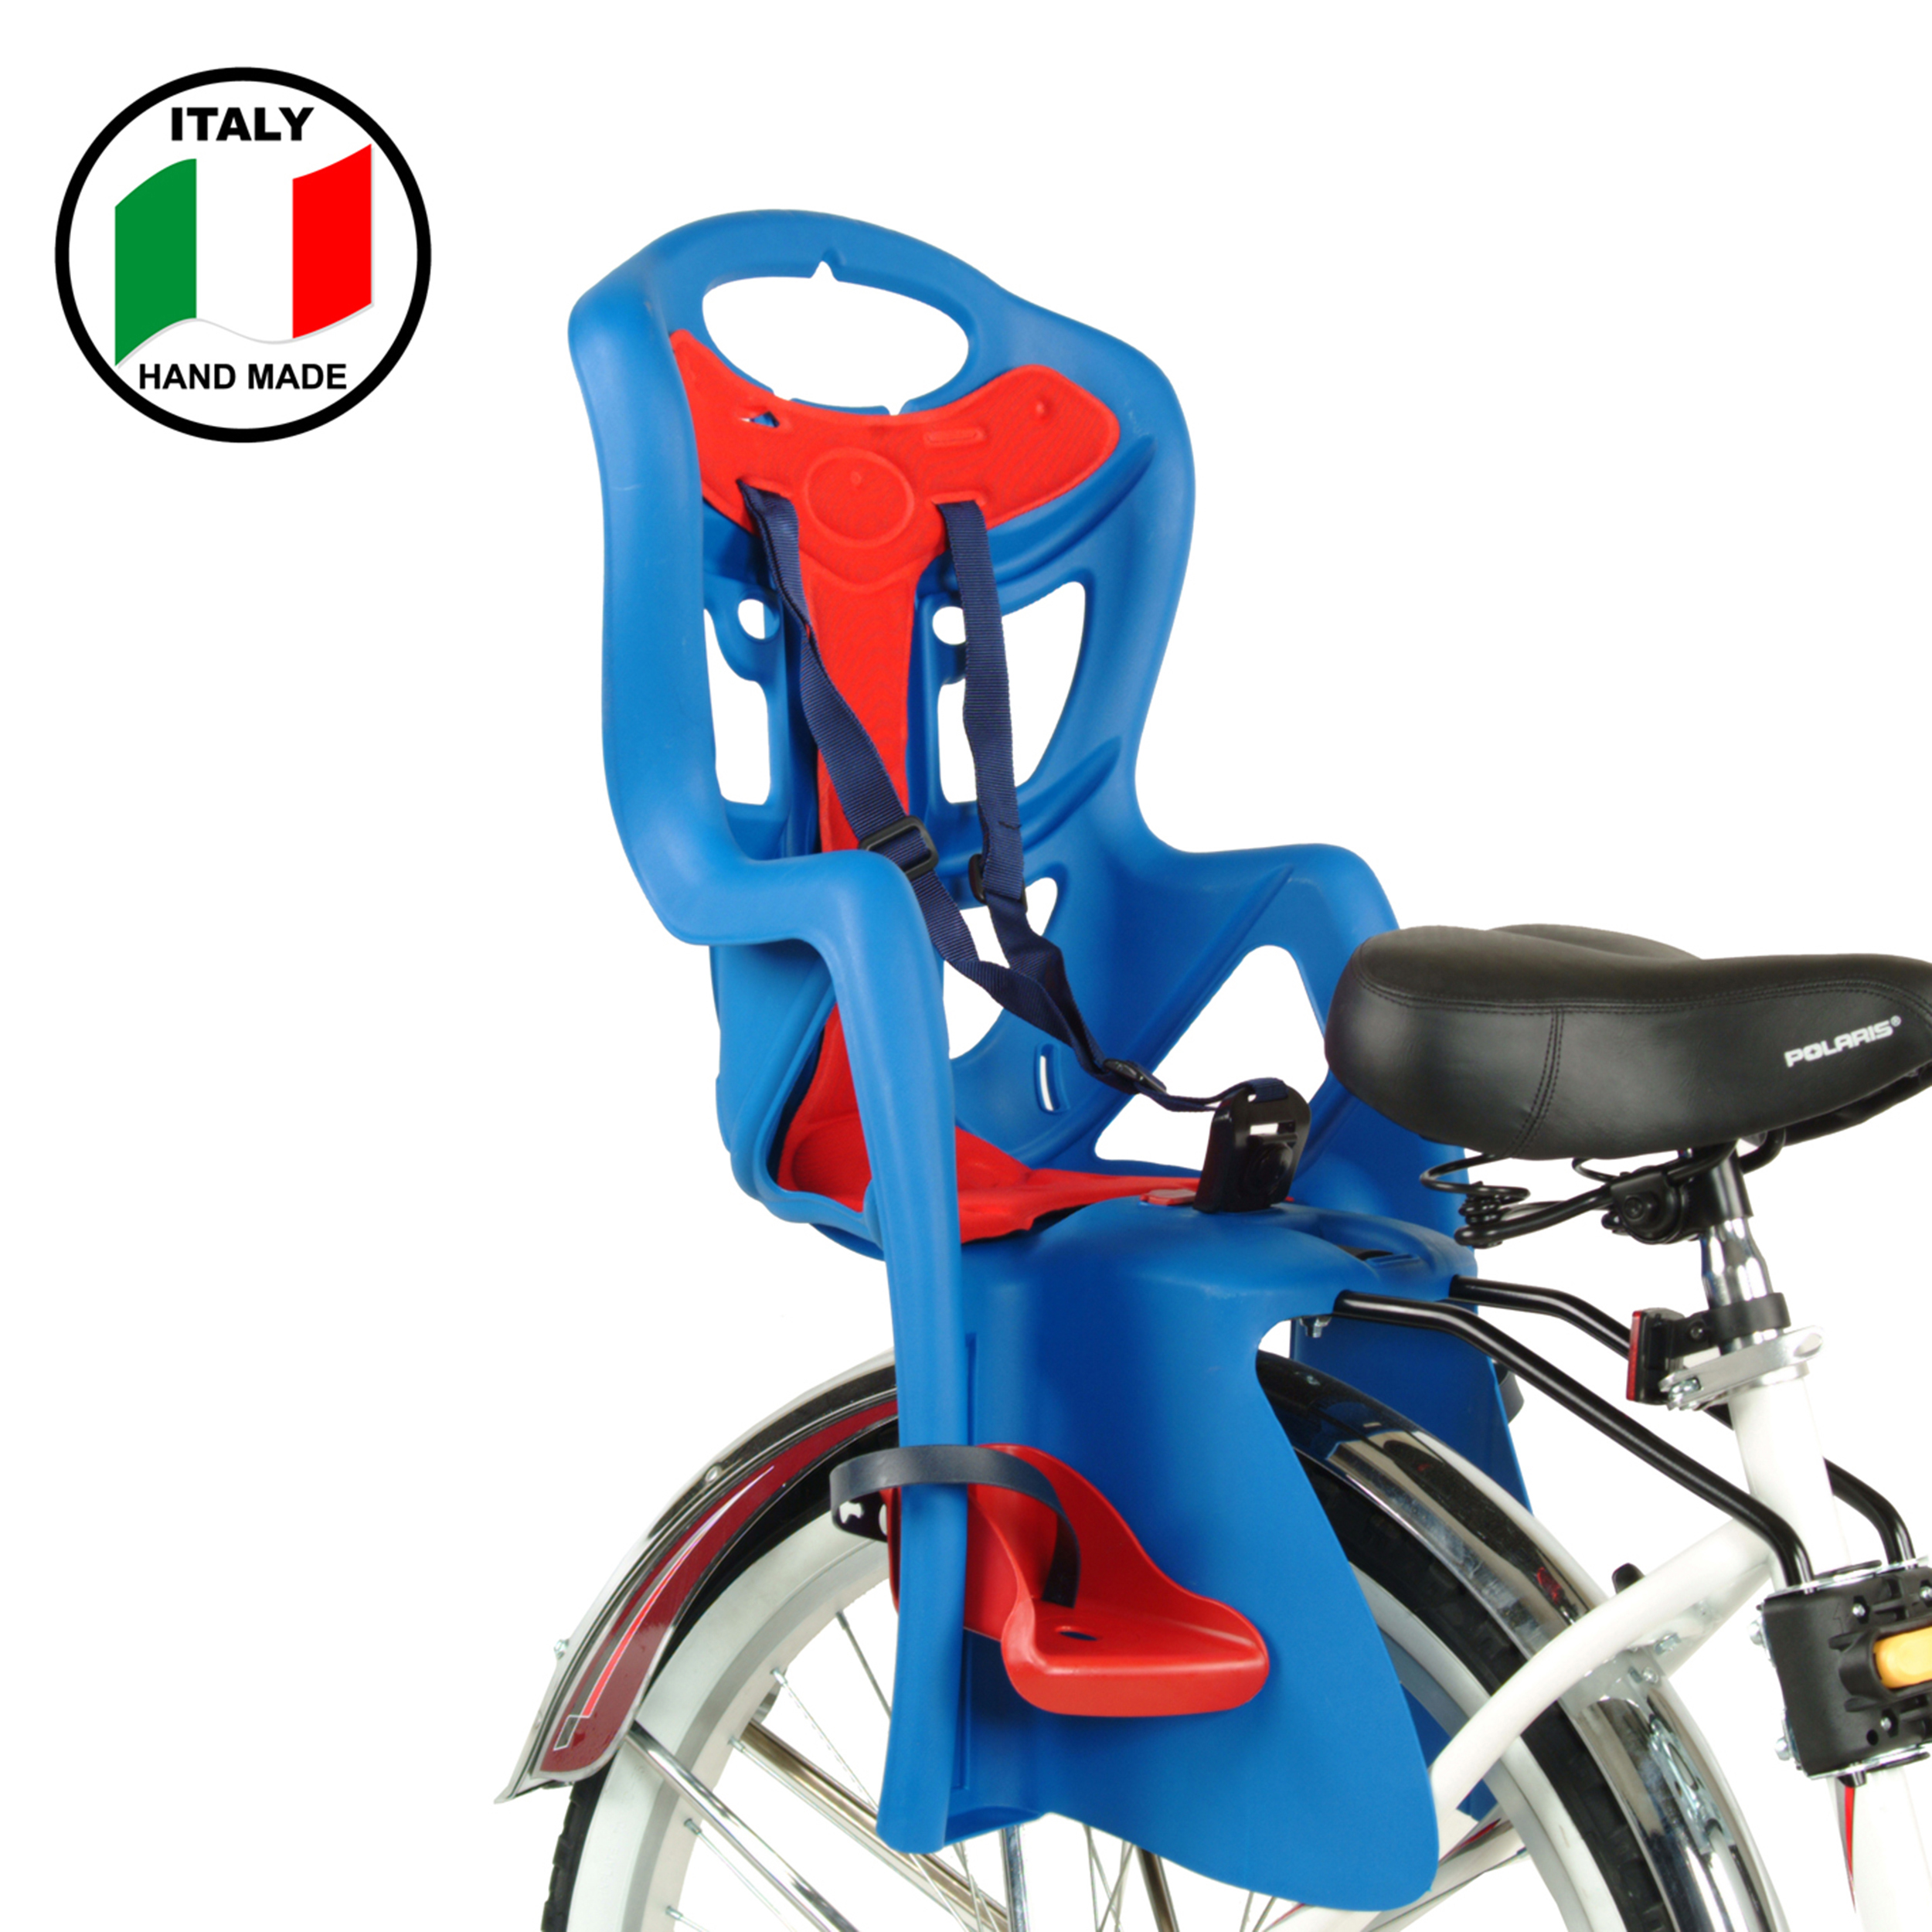 Bellelli Pepe Seatpost Mounted Baby Carrier, Red/Blue - image 5 of 5